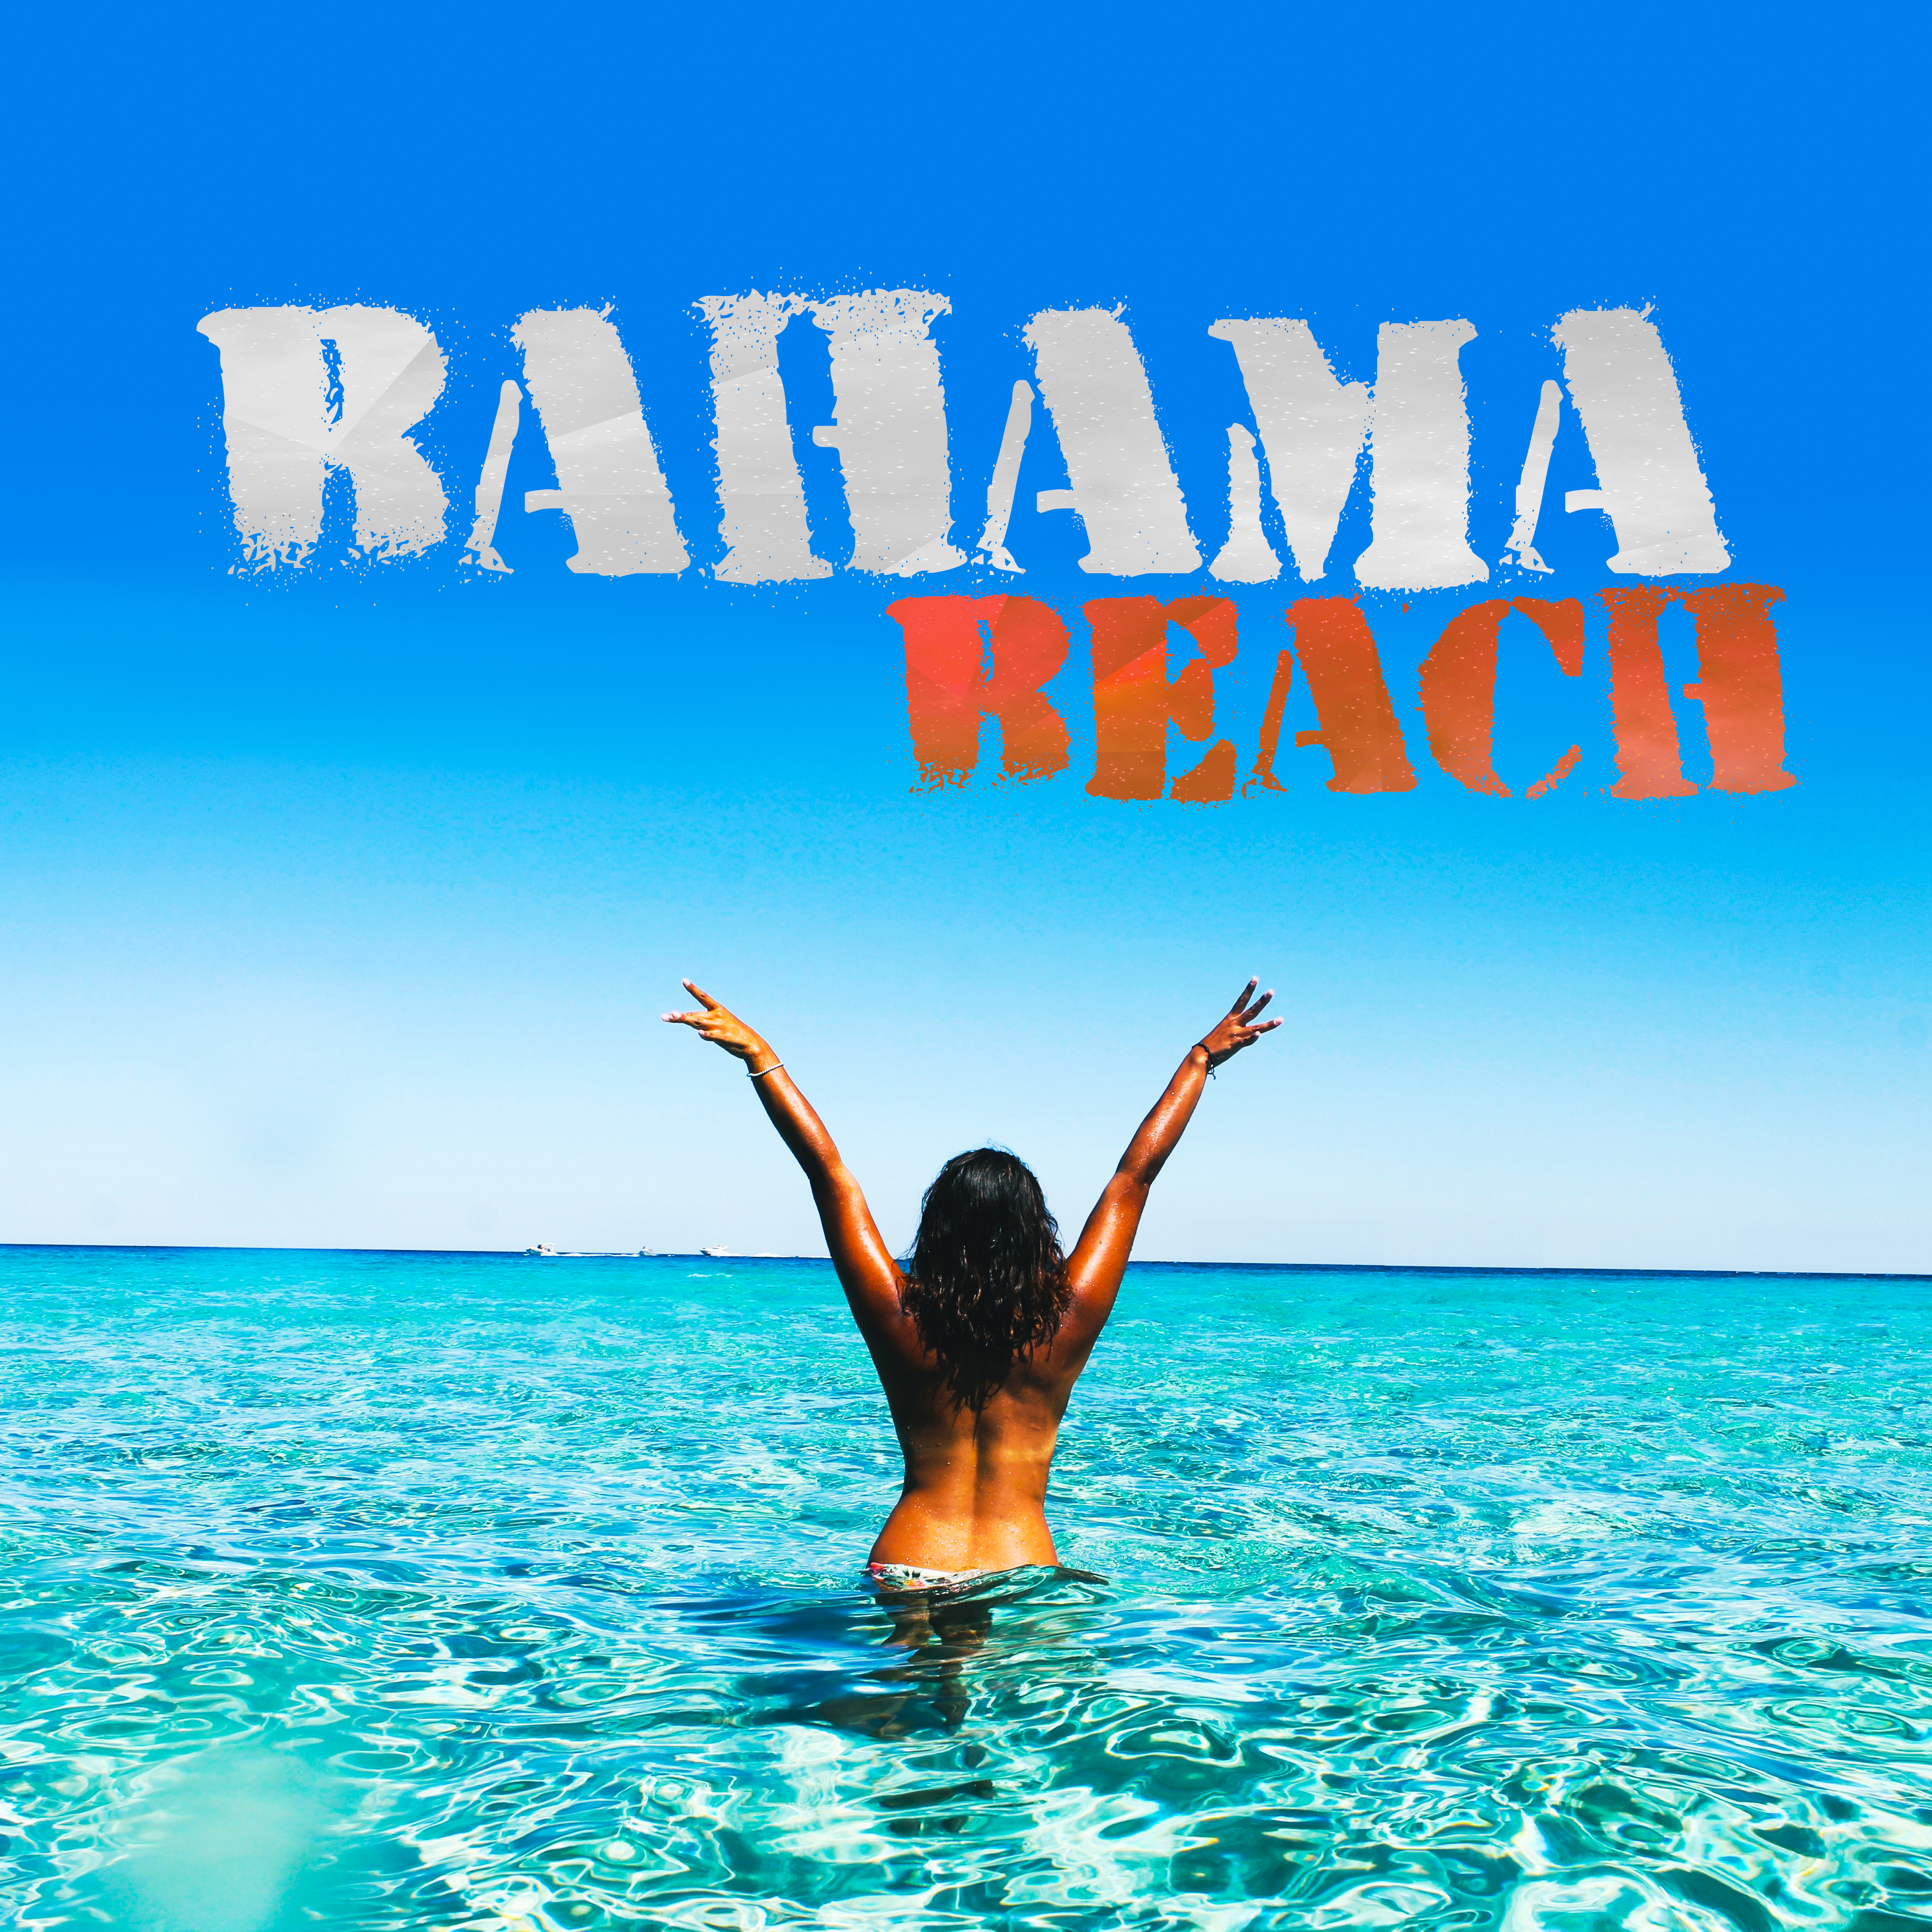 Bahama Beach – Dance Music, Chill Out 2017, Relax, Party, Summer, Lounge